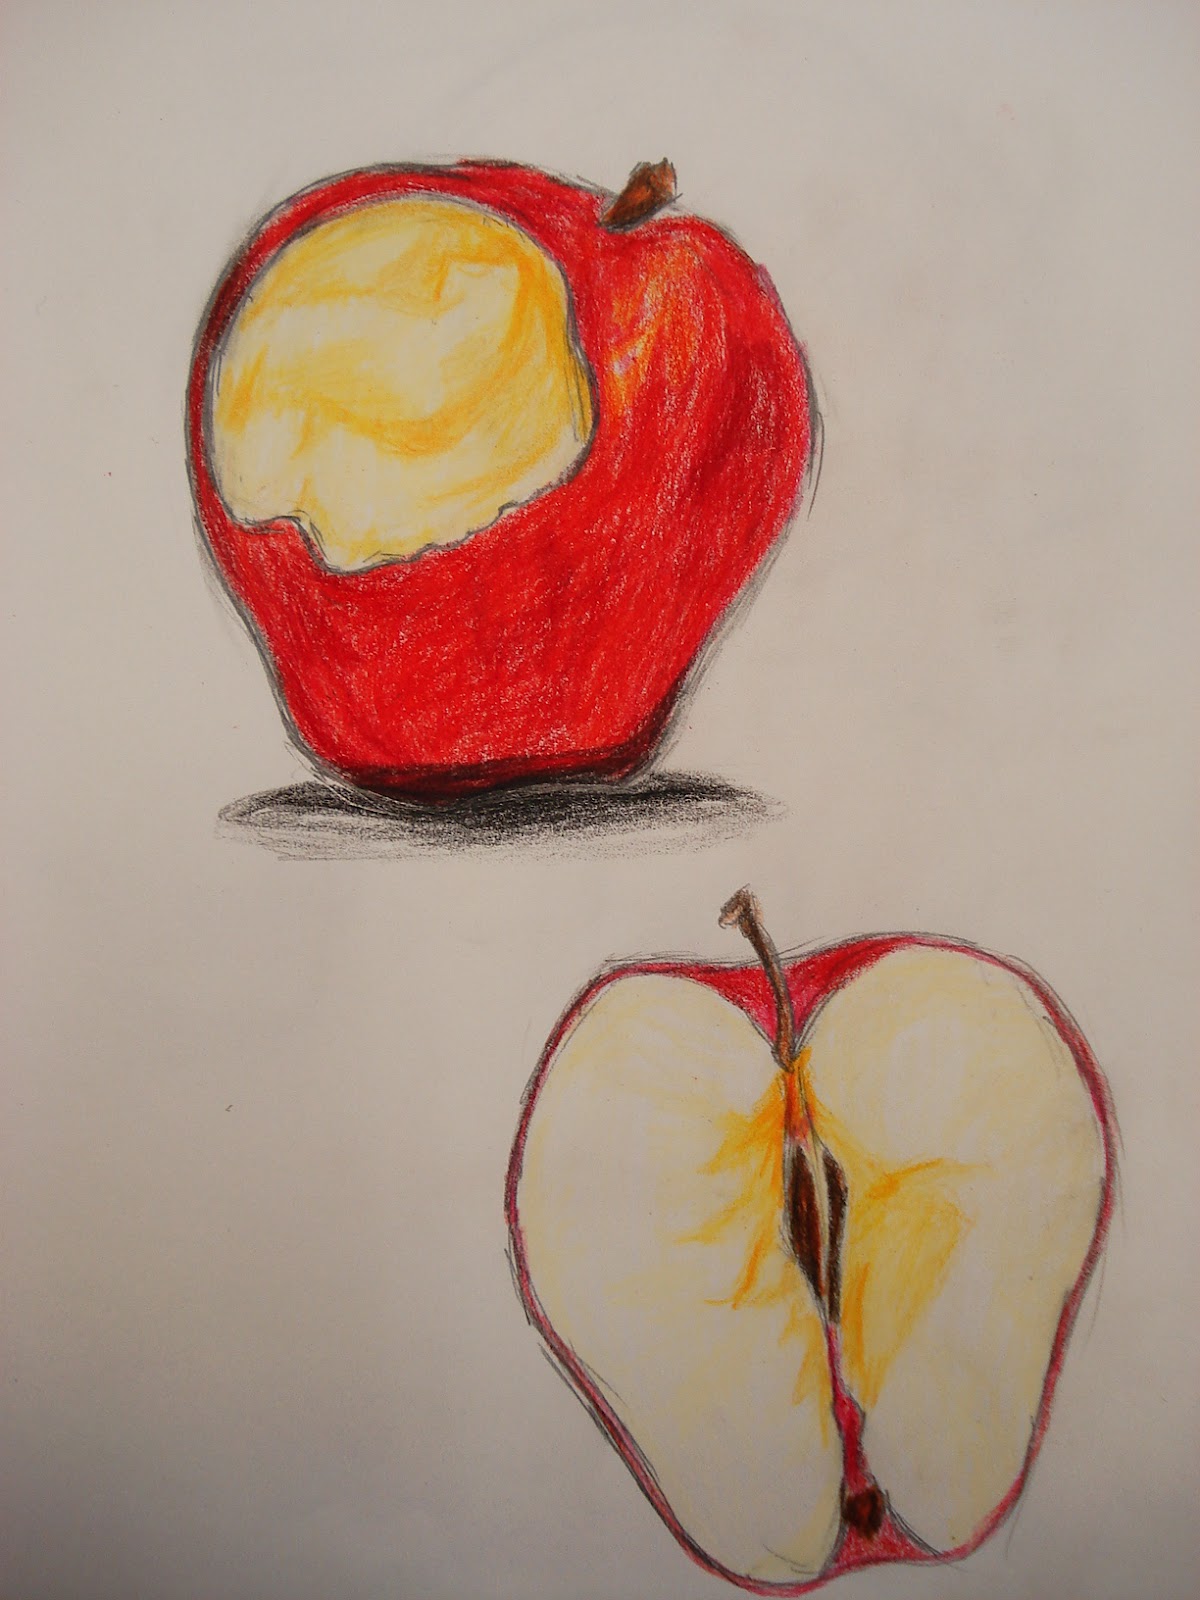 a faithful attempt: Sliced Fruit Drawings